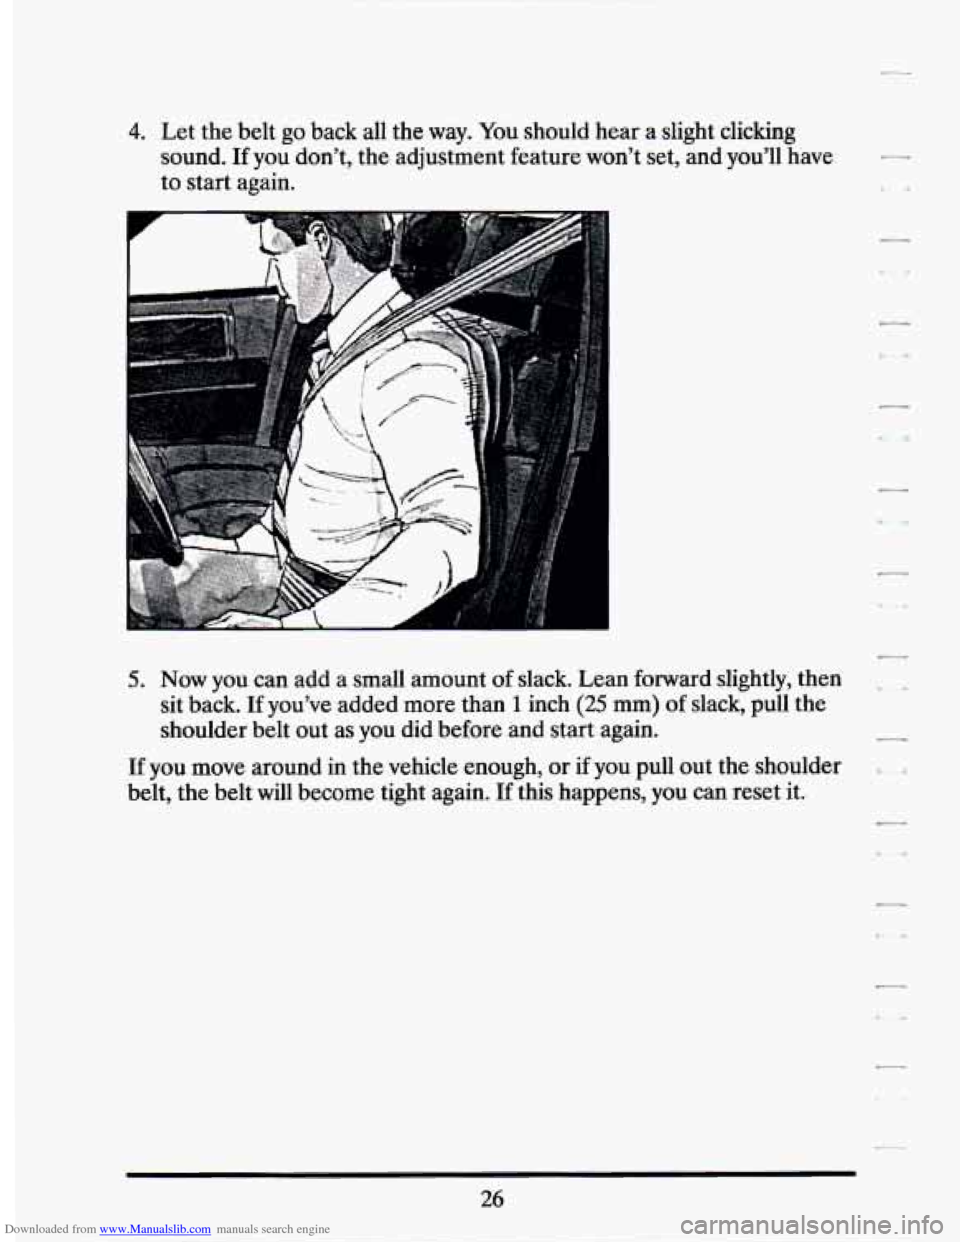 CADILLAC SEVILLE 1994 4.G Owners Guide Downloaded from www.Manualslib.com manuals search engine 4. Let  the belt go back  all  the way.  You  should hear a  slight  clicking 
sound. 
If you  don’t,  the adjustment  feature won’t set, a